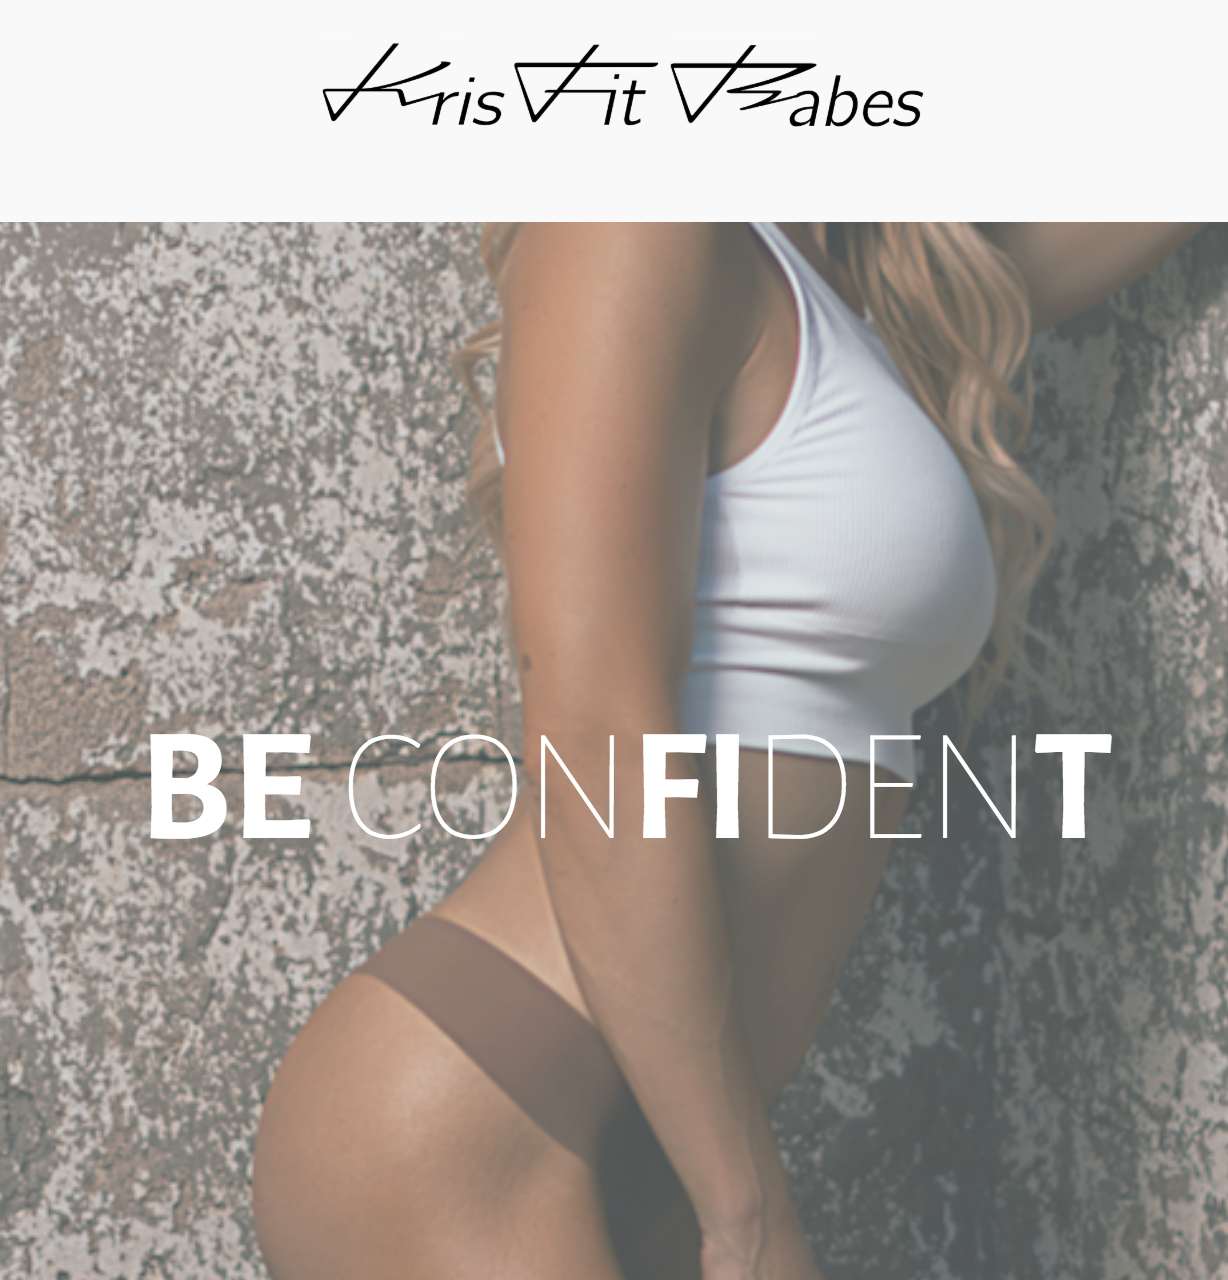 A fitness &amp; Nutrition website to help you find your most confident self.